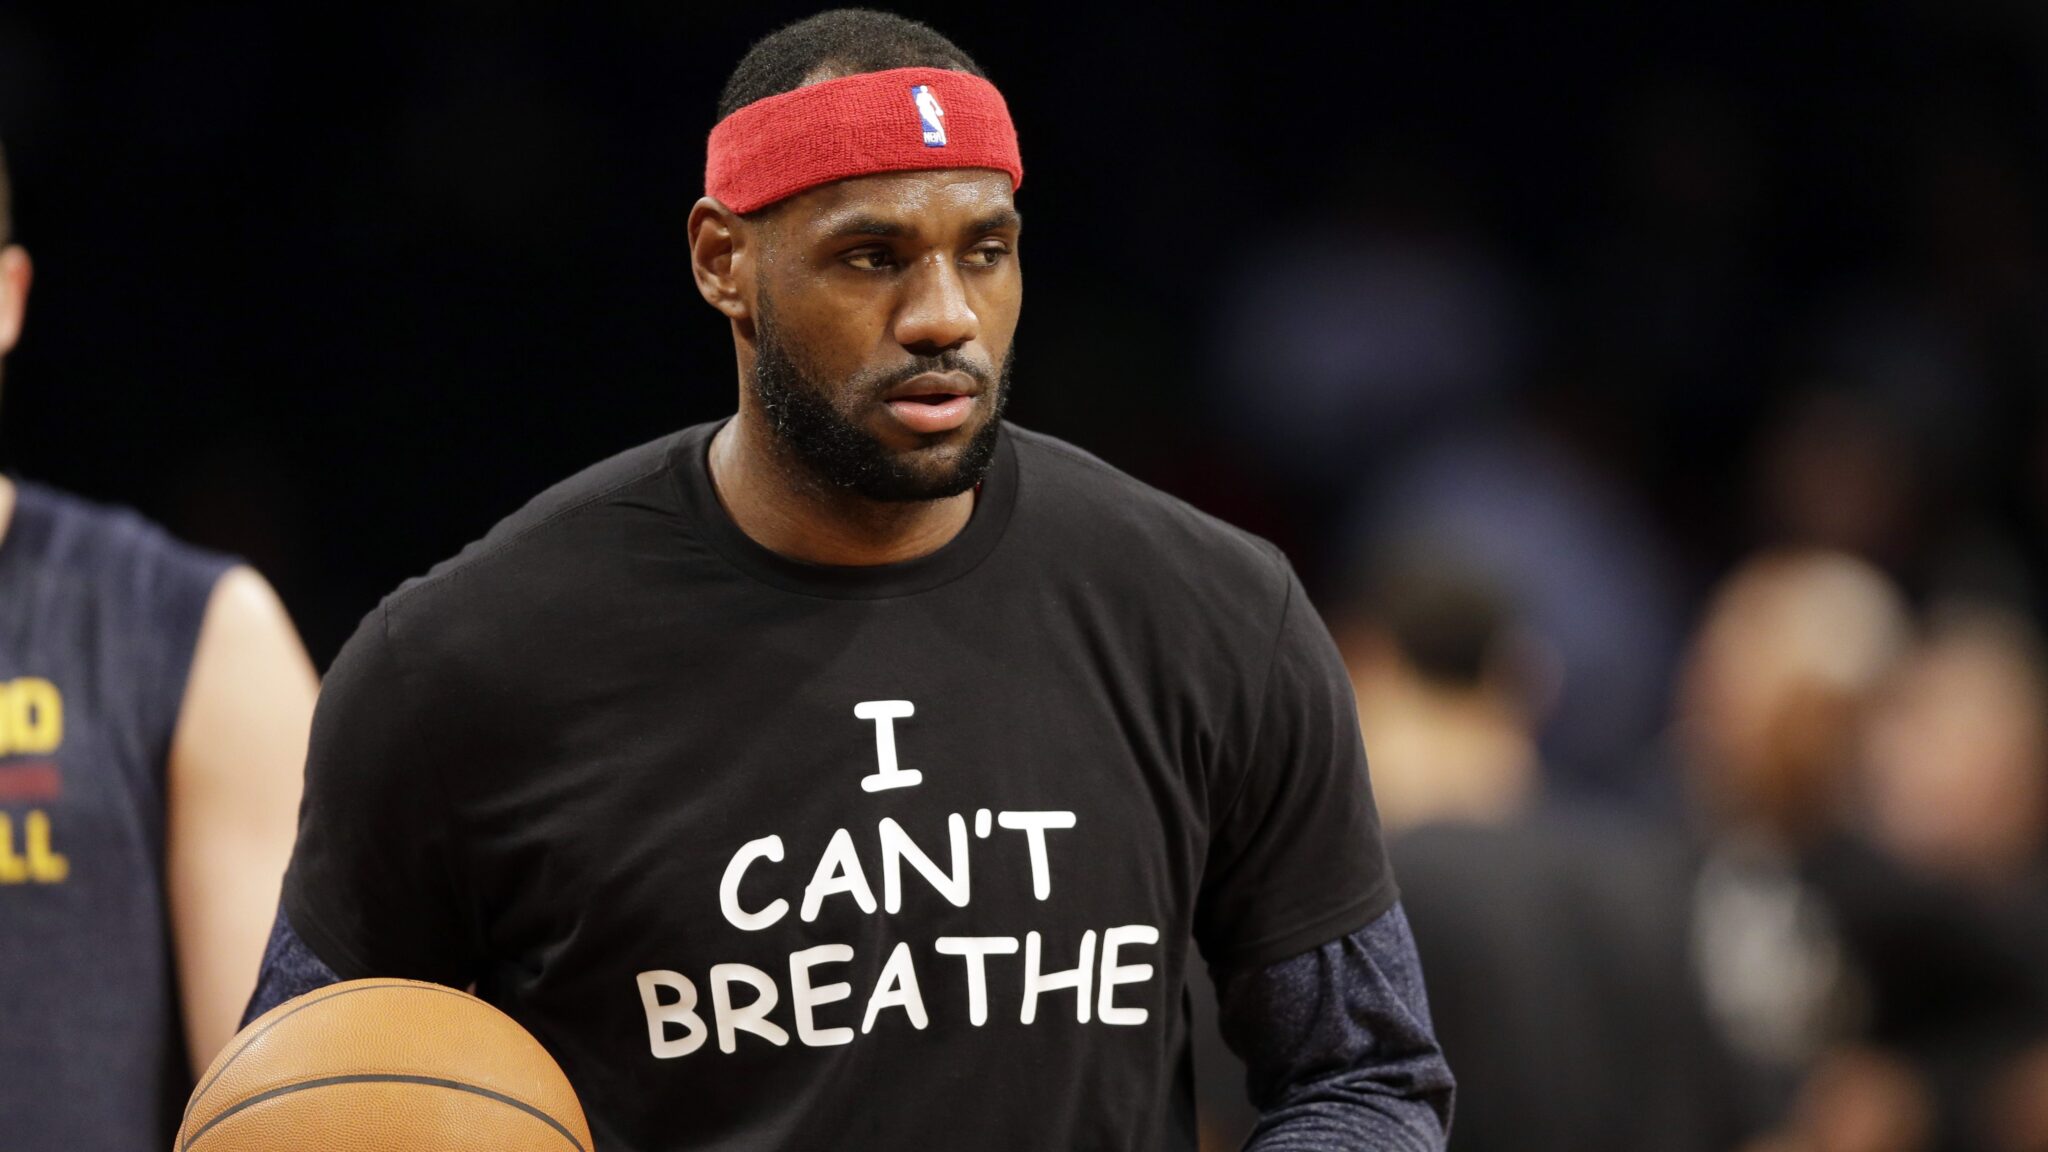 Lebron James Stays True To The Cause!!!